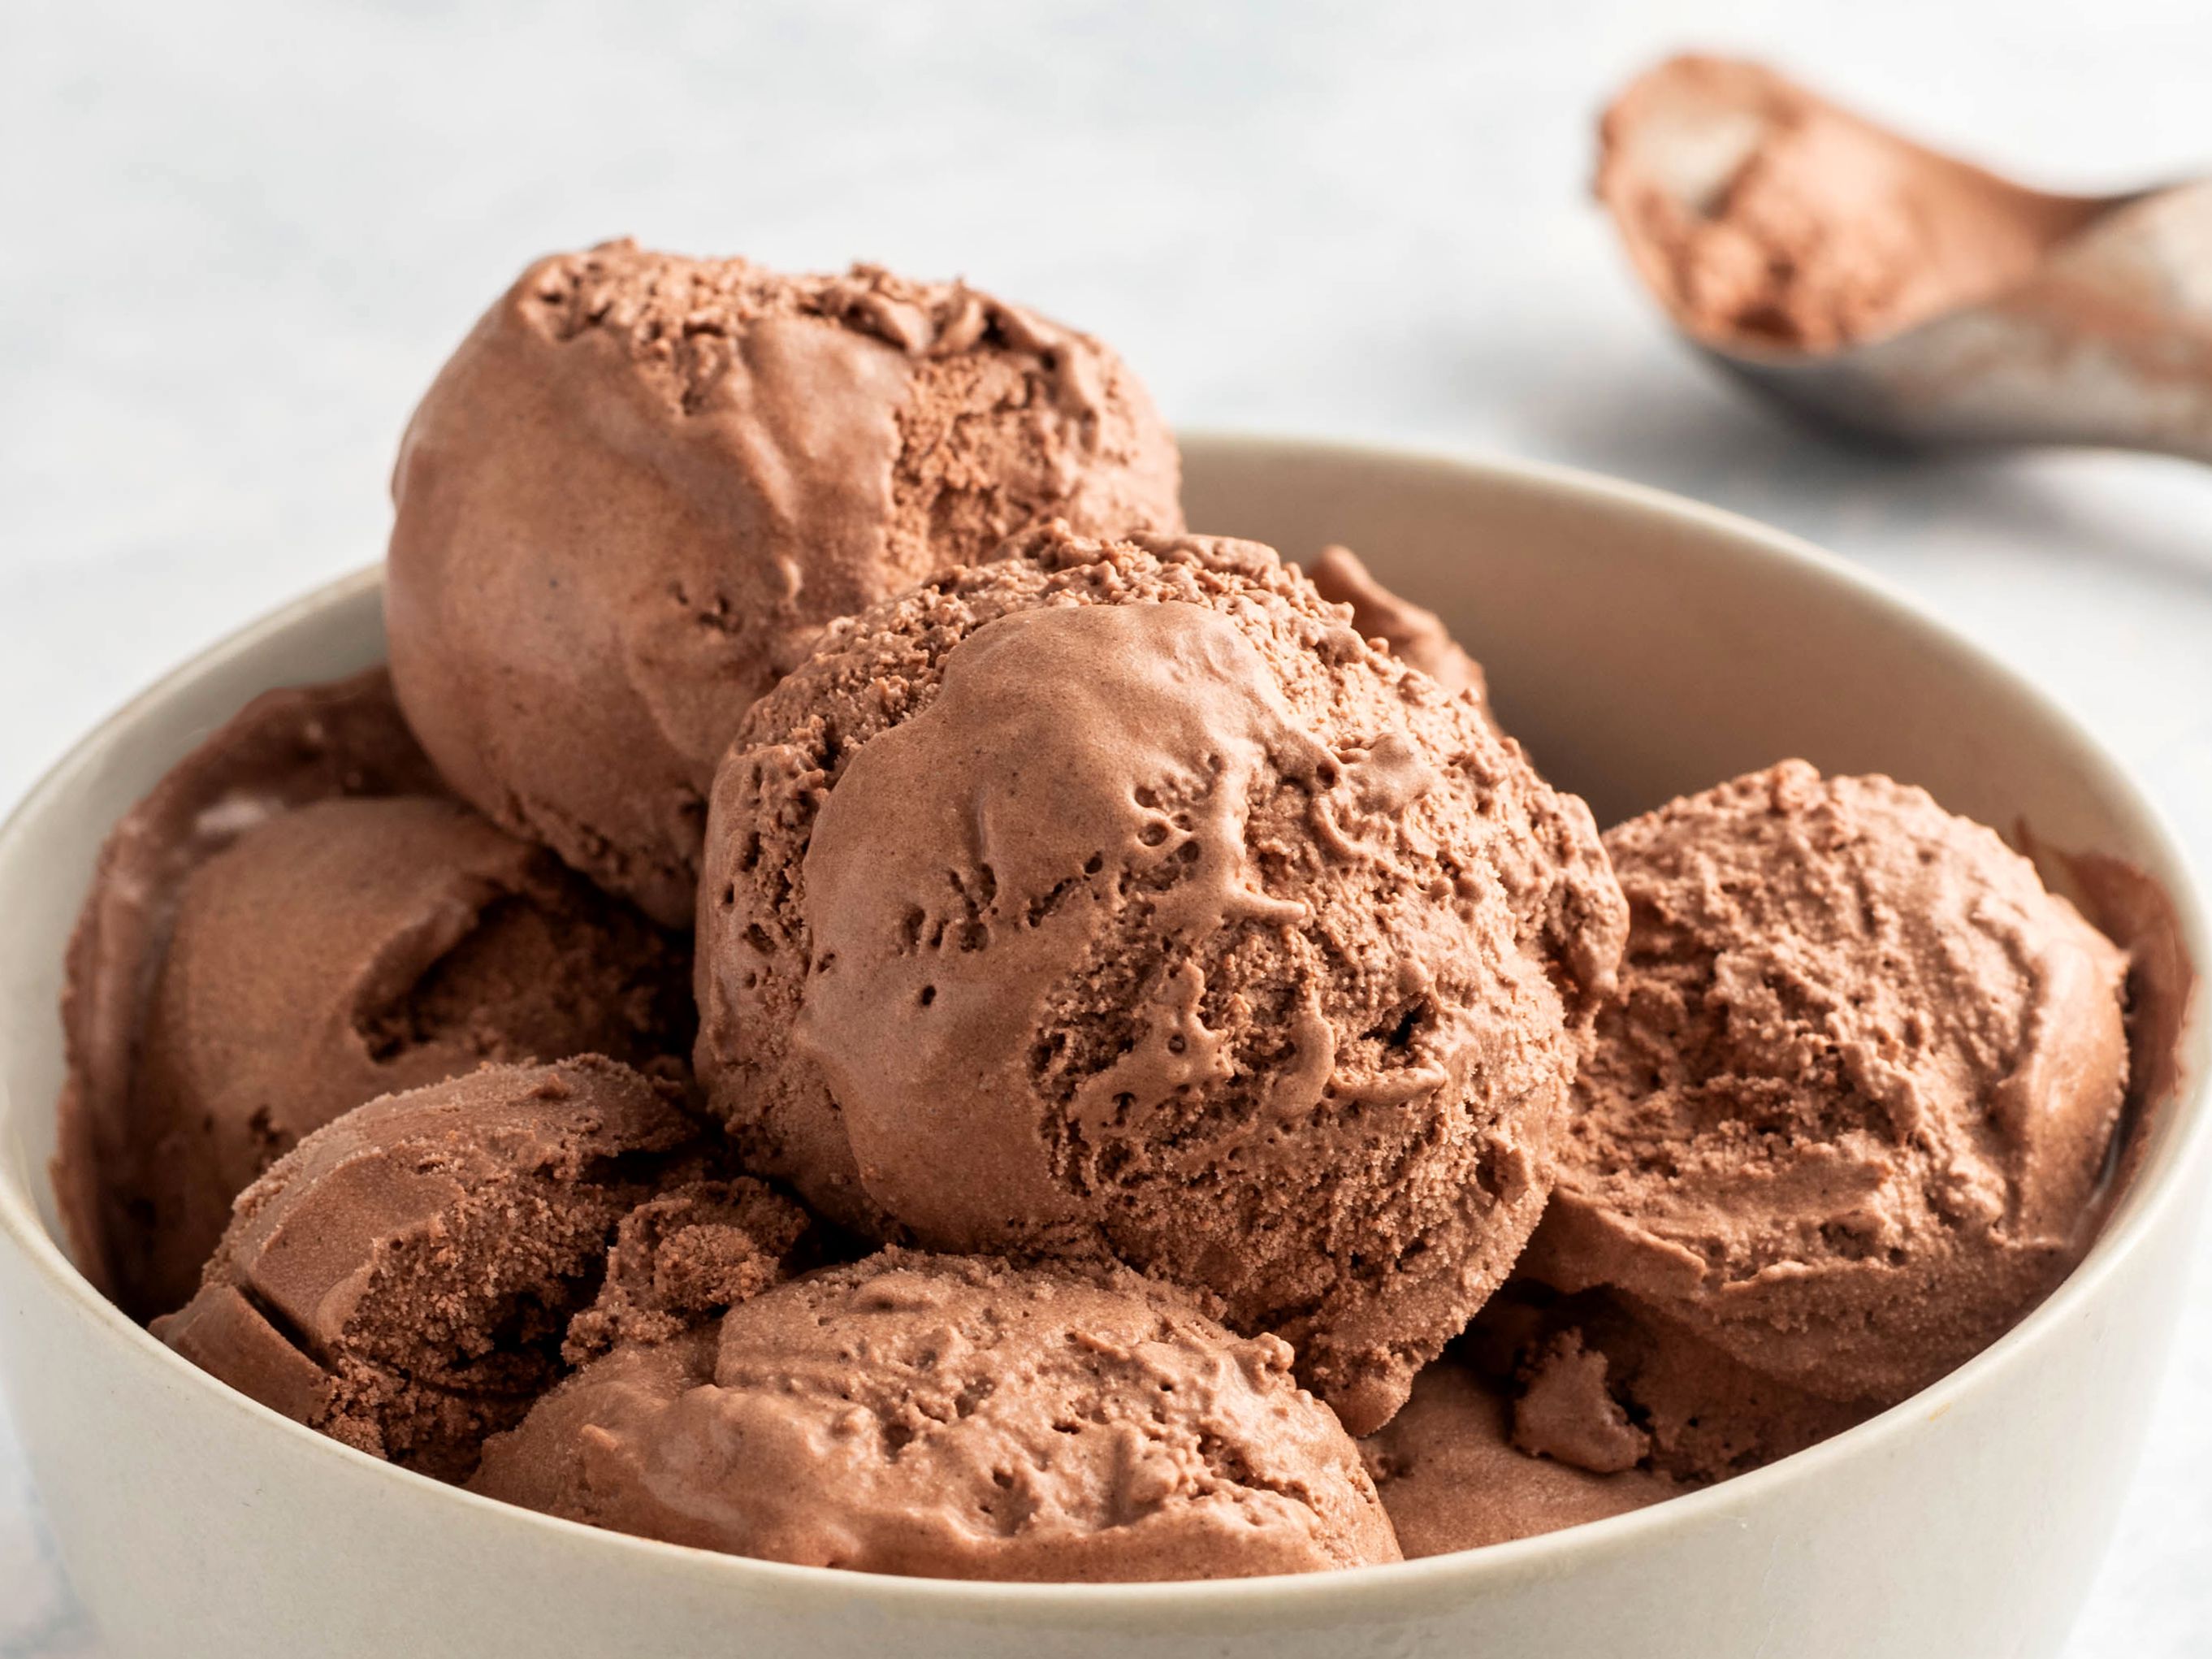 scoops of chocolate ice cream in white bowl